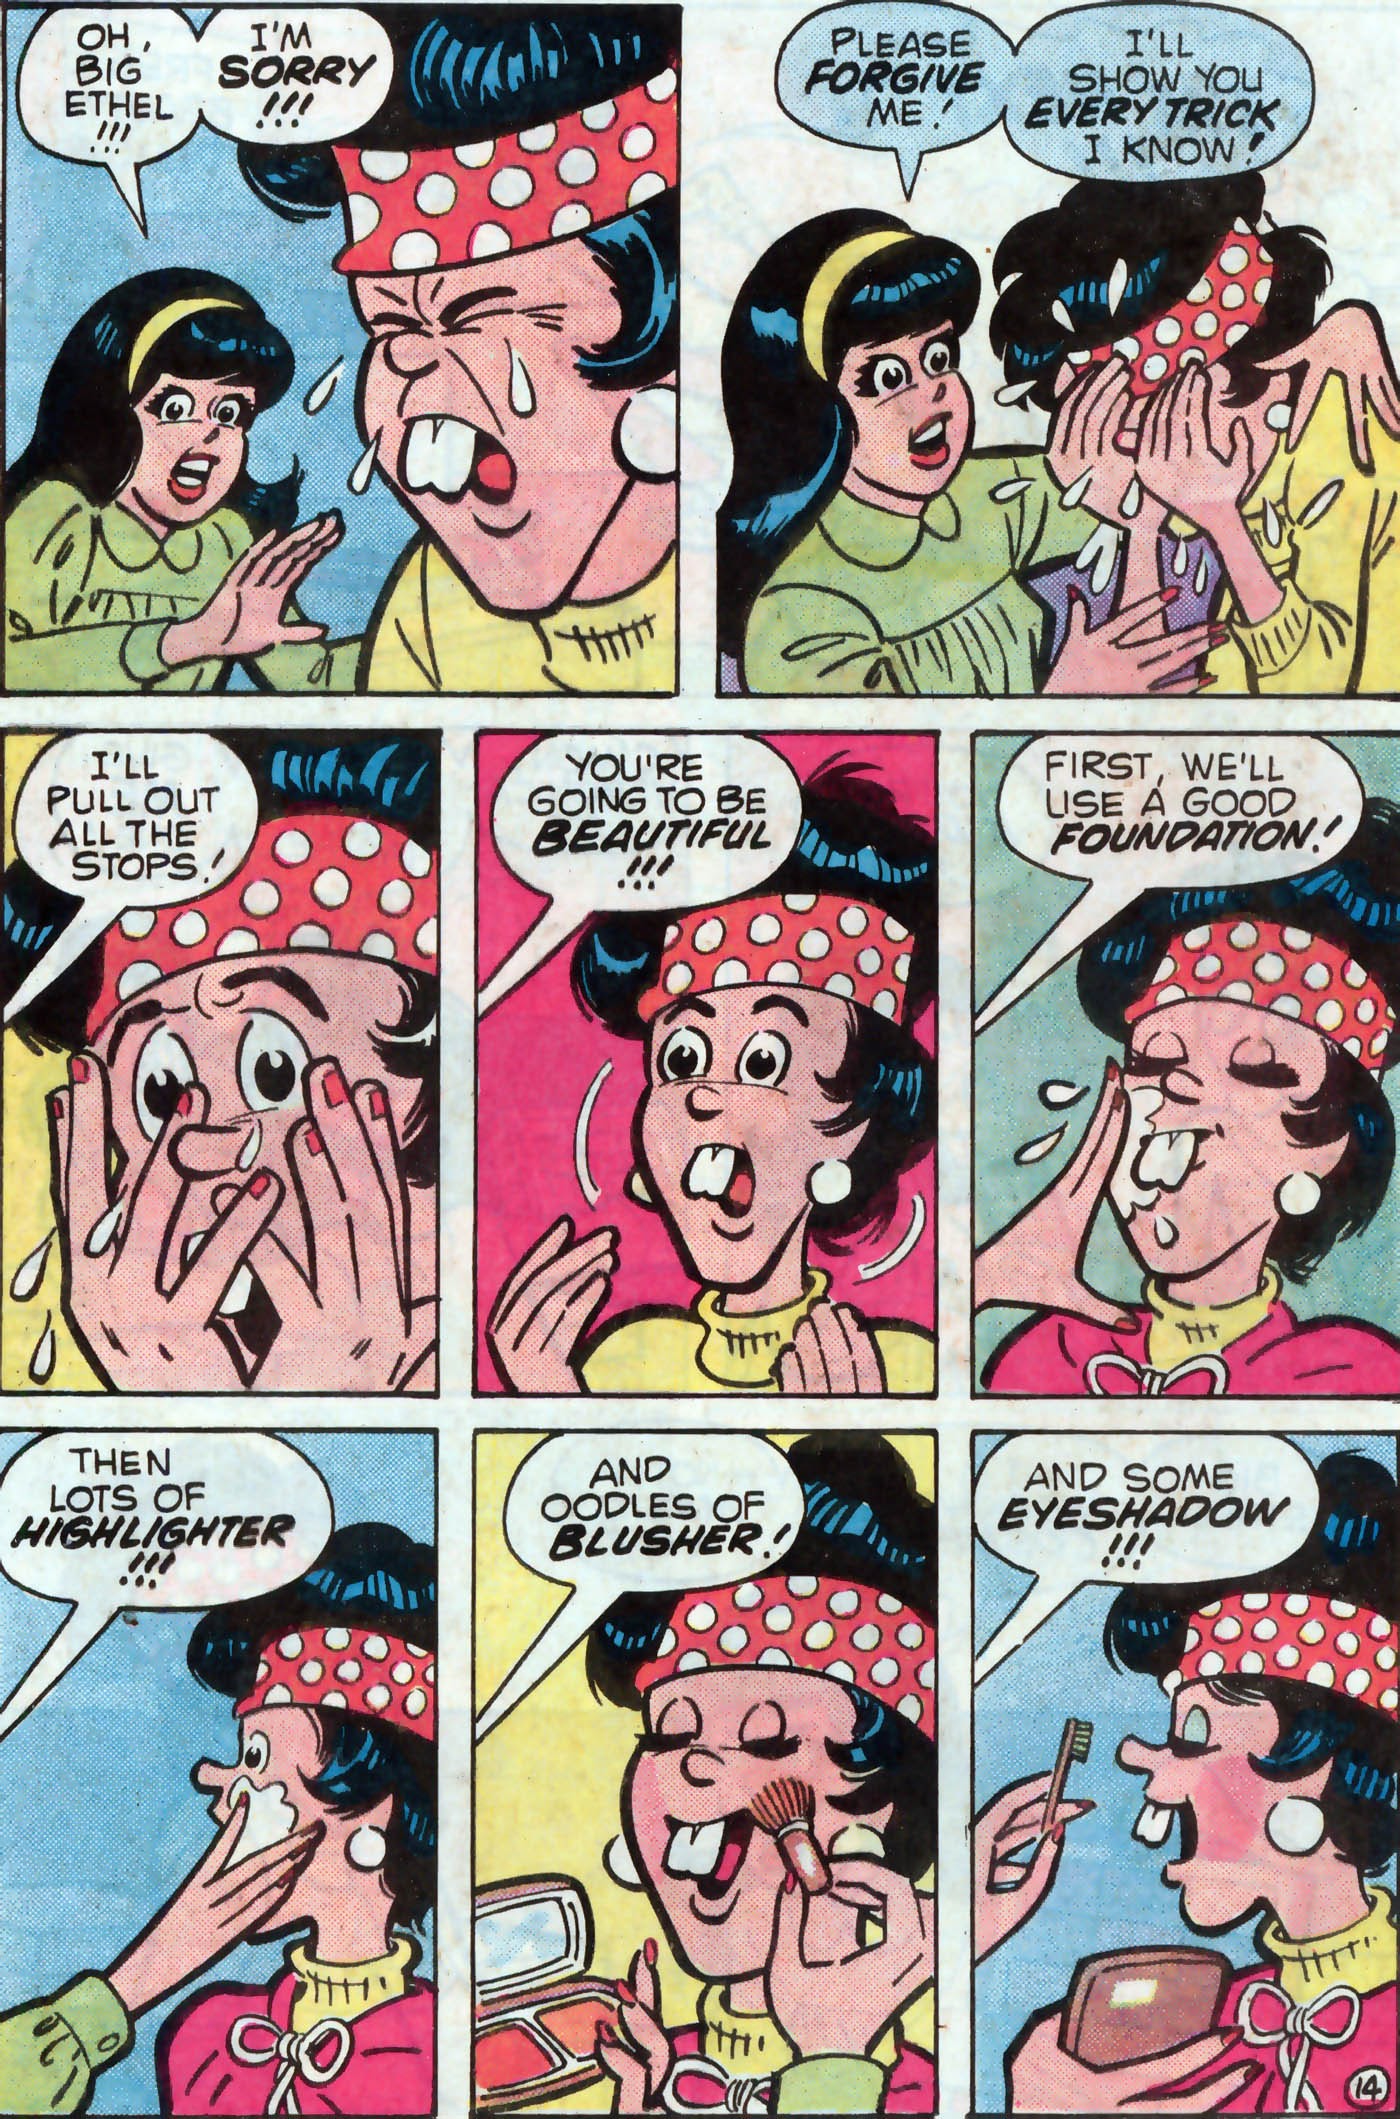 Read online Archie and Big Ethel comic -  Issue # Full - 16